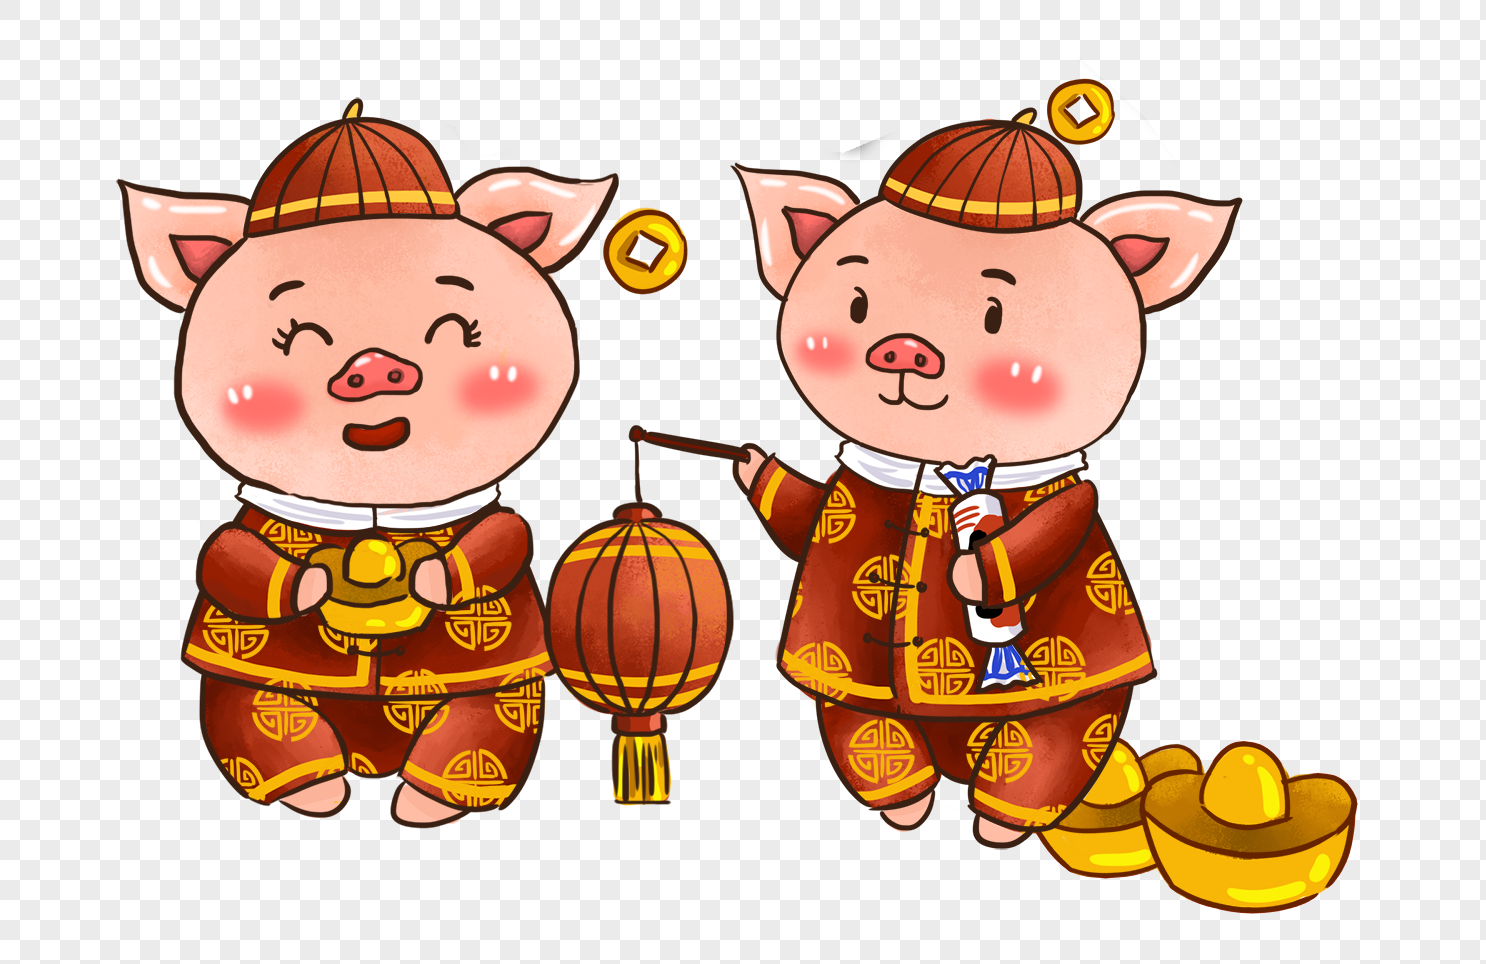 New year pig cartoon * image png image_picture free ...